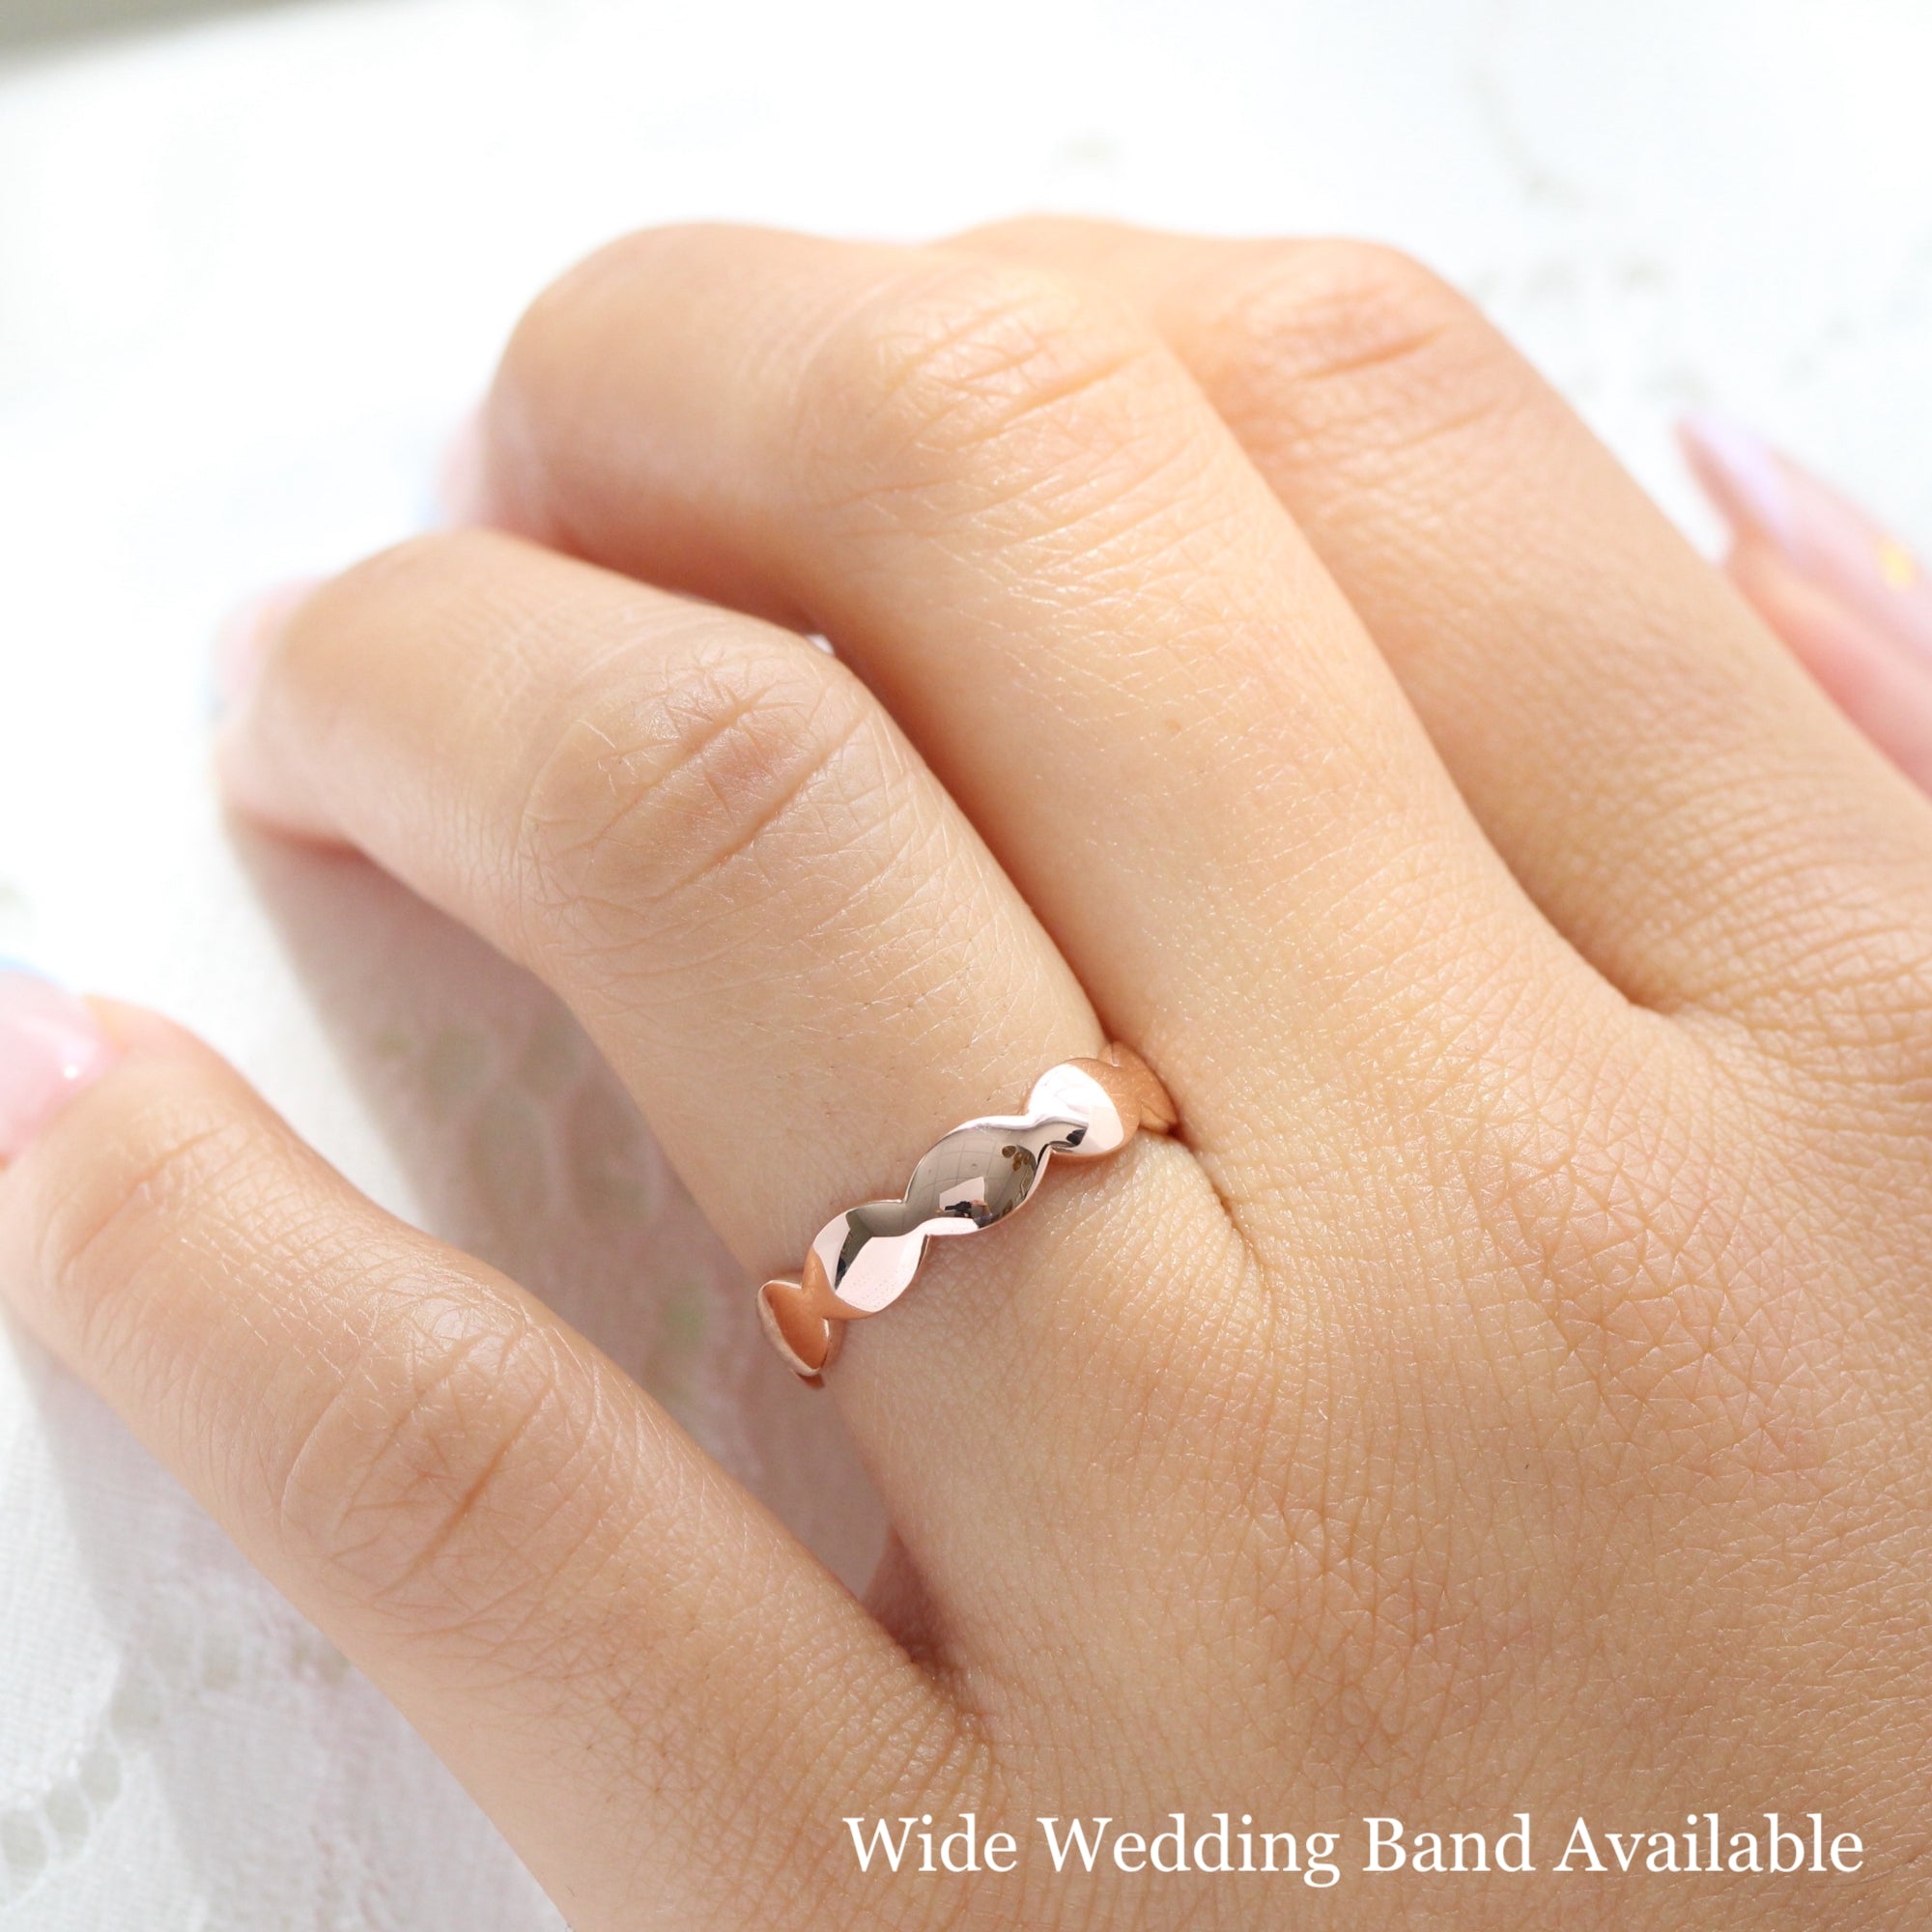 Unique gender neutral wedding ring, scalloped wedding band rose gold wide wedding band la more design jewelry